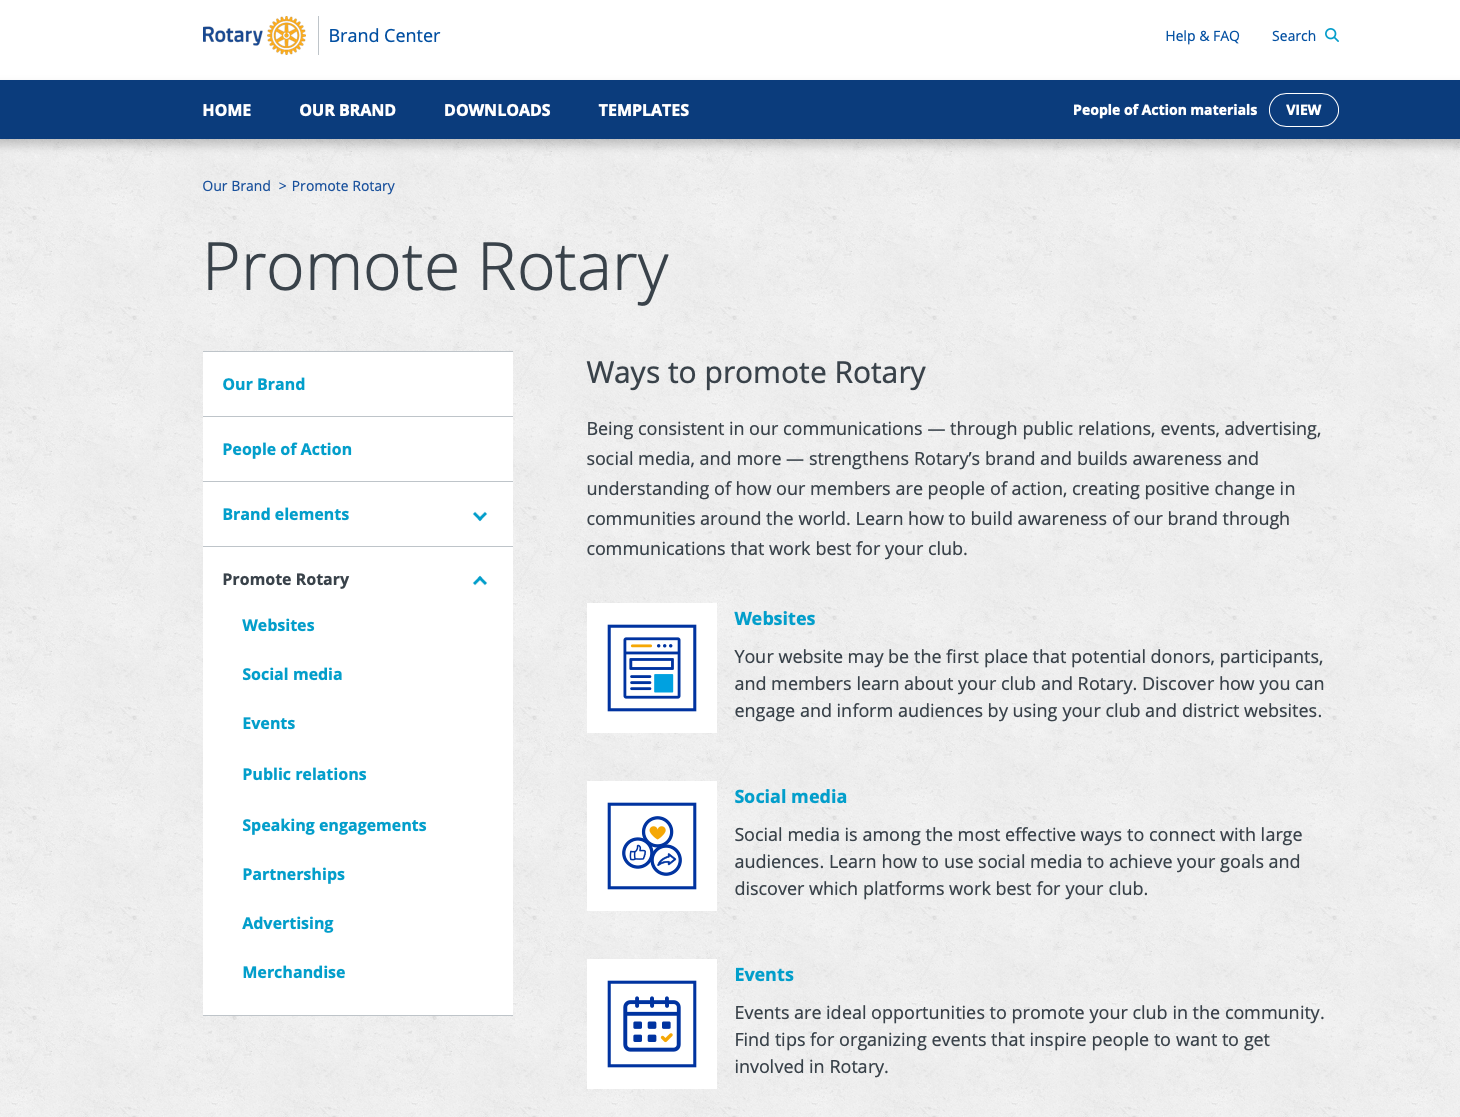 Screen shot of Promote Rotary